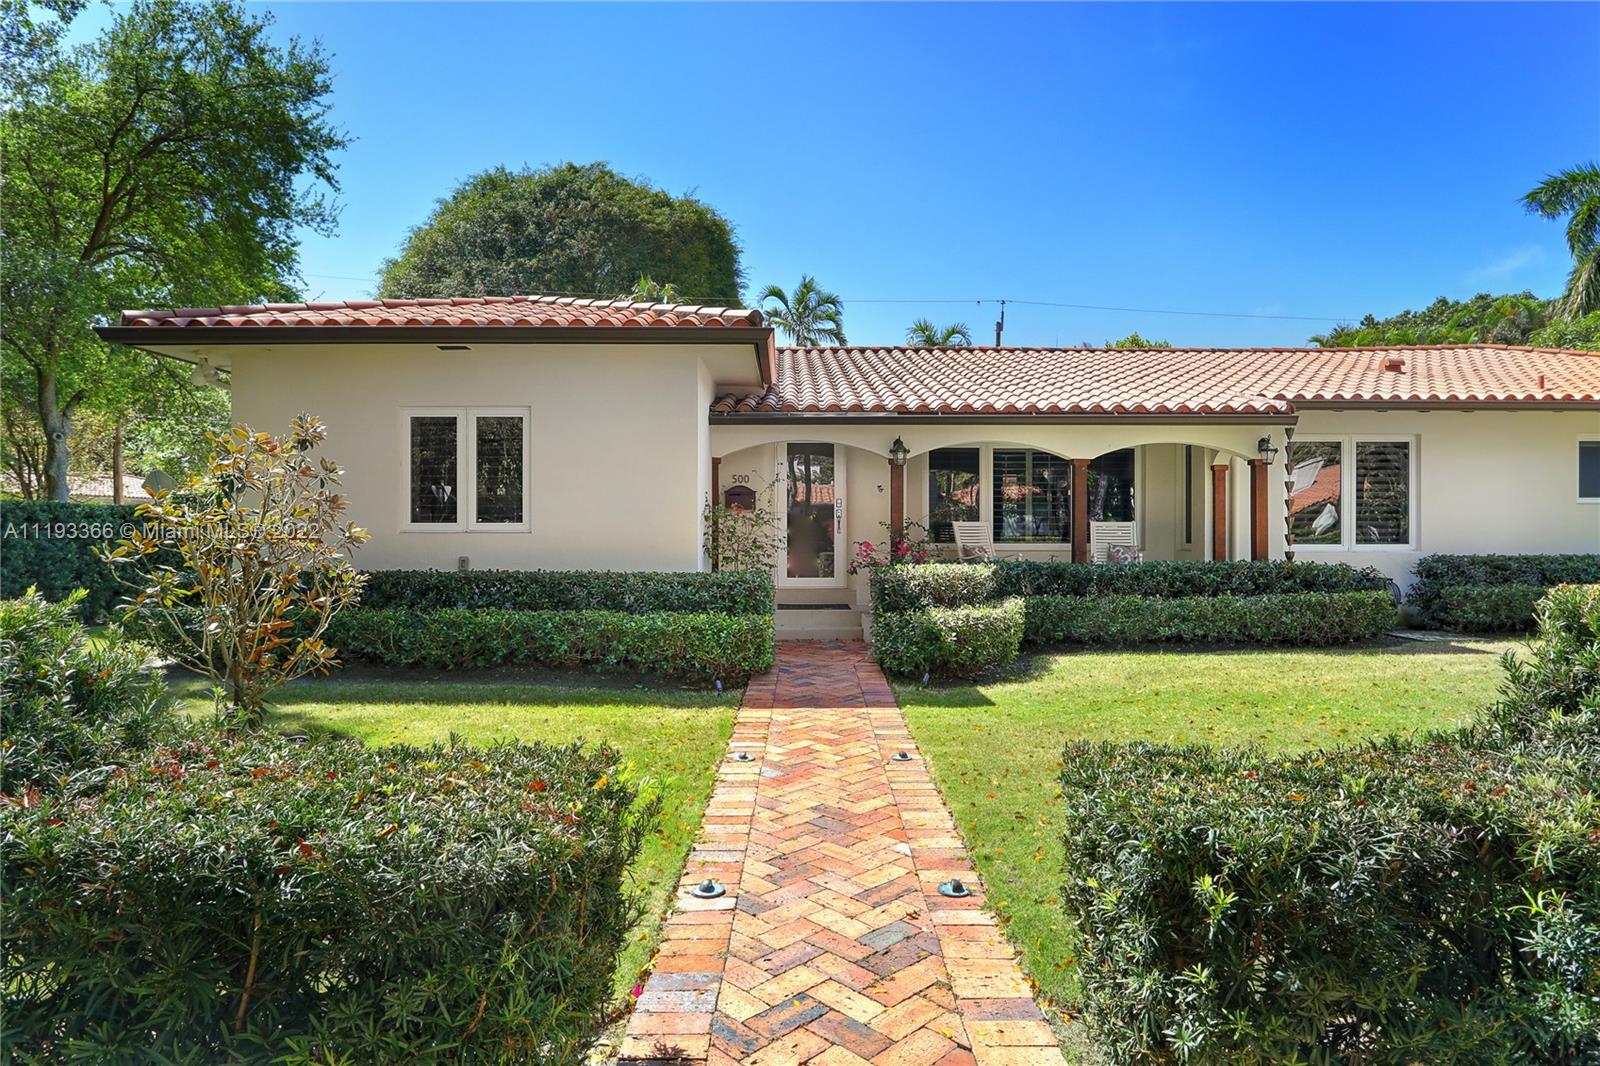 Absolutely impeccable 3 BR, 3.5 BA + office, 2,733 SF home on a 12,500 SF lot, situated on the prettiest street in Coral Gables!  A true classic, the beautiful covered front porch leads to a foyer entry, formal living & dining rooms, and sunny family room overlooking a long covered patio and the lush, private lawn, complete with its own putting green!  The spacious kitchen has fresh, white cabinetry, stainless steel appliances, pantry, & eat-in area.  3 large bedrooms each feature their own en-suite bathroom, and are situated privately away from one another, & there is an additional office with its own half bath.  Beautiful, newly-refinished wood floors, original moldings, hurricane impact glass throughout, 1 car garage, & more just 1 block from all that downtown Coral Gables has to offer!